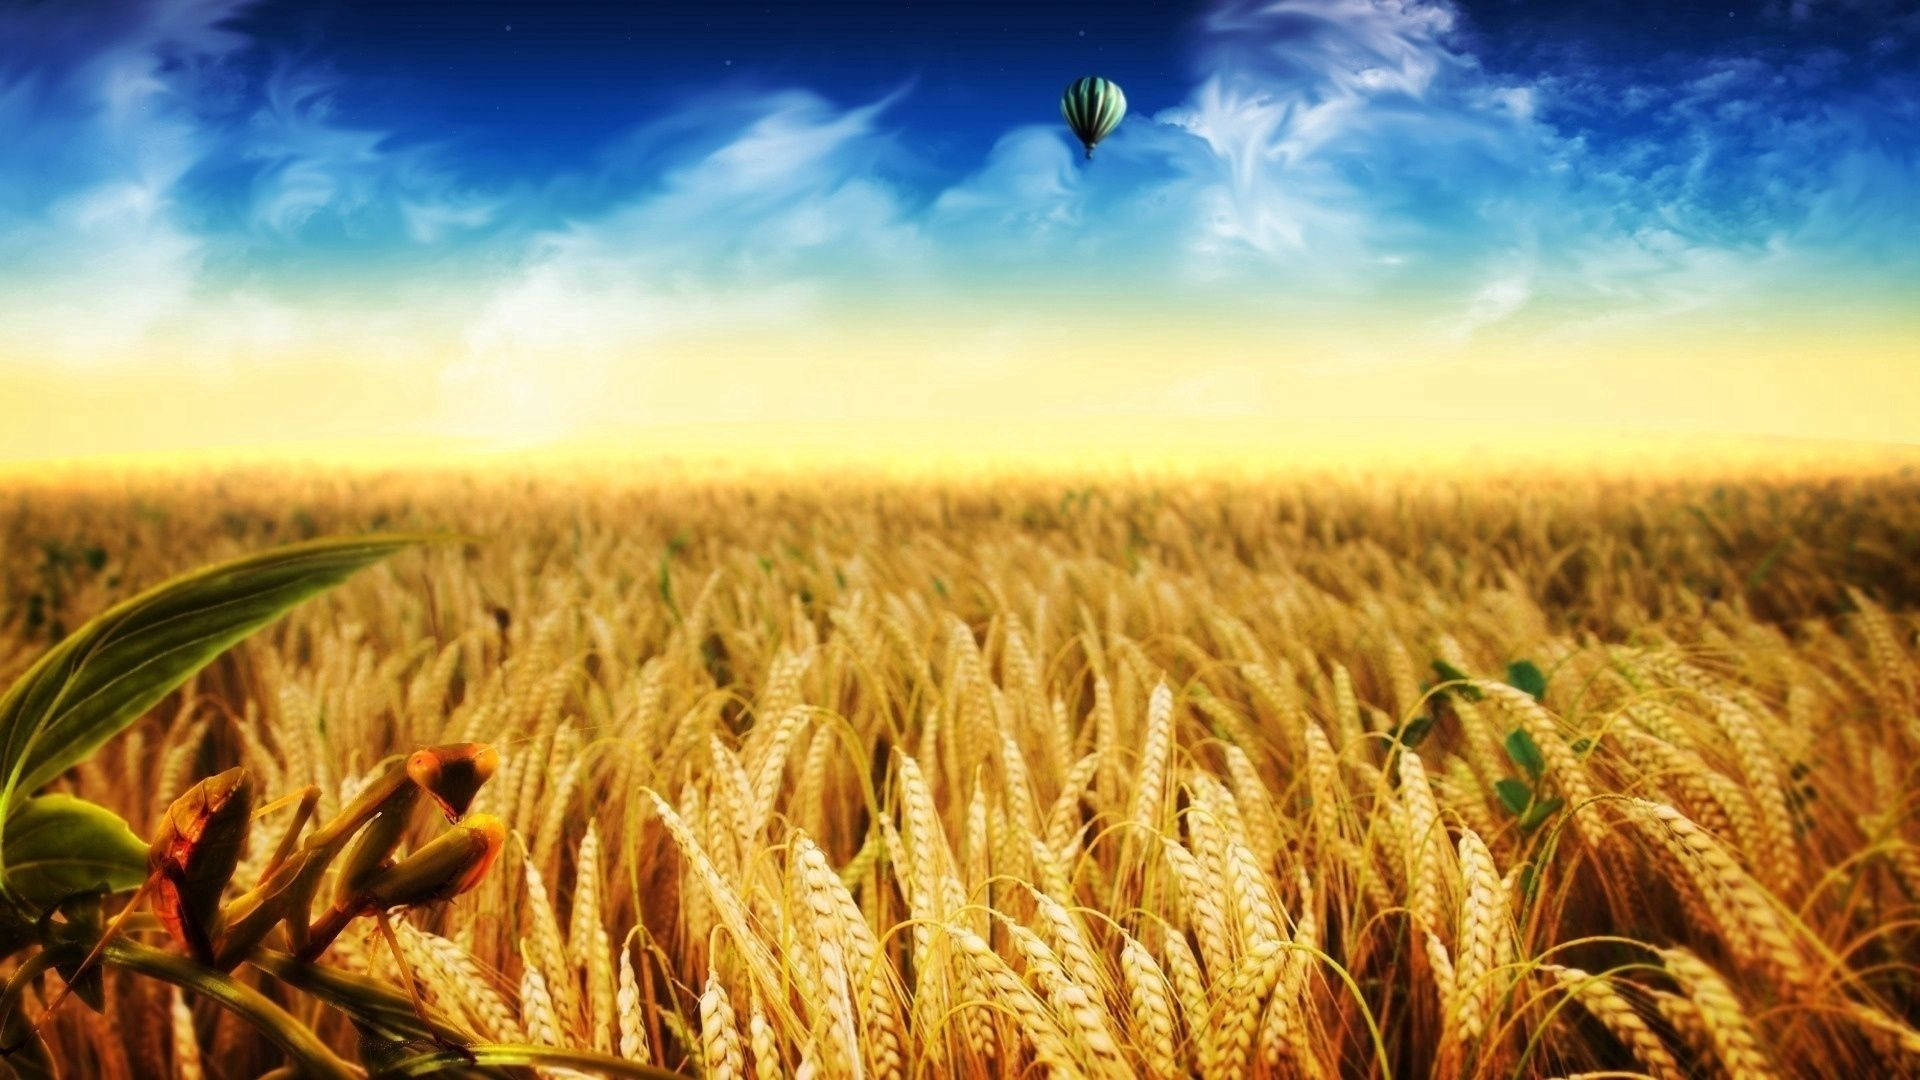 The Sun Sets On A Field of Golden Dreams Wallpaper